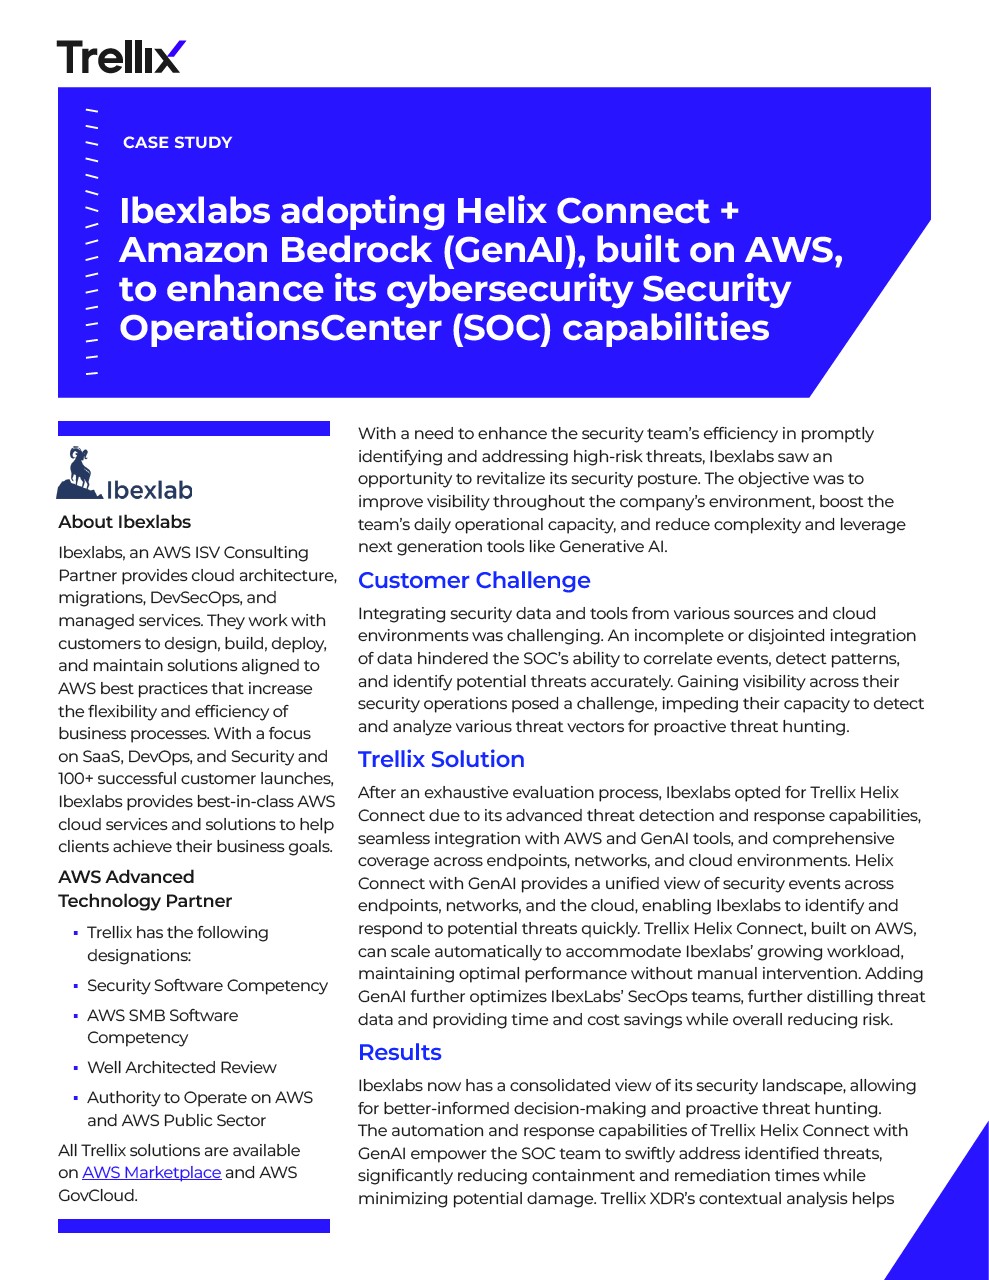 Ibexlabs adopting Helix Connect, built on AWS, to enhance its cybersecurity Security Operations Center (SOC) capabilities Thumbnail